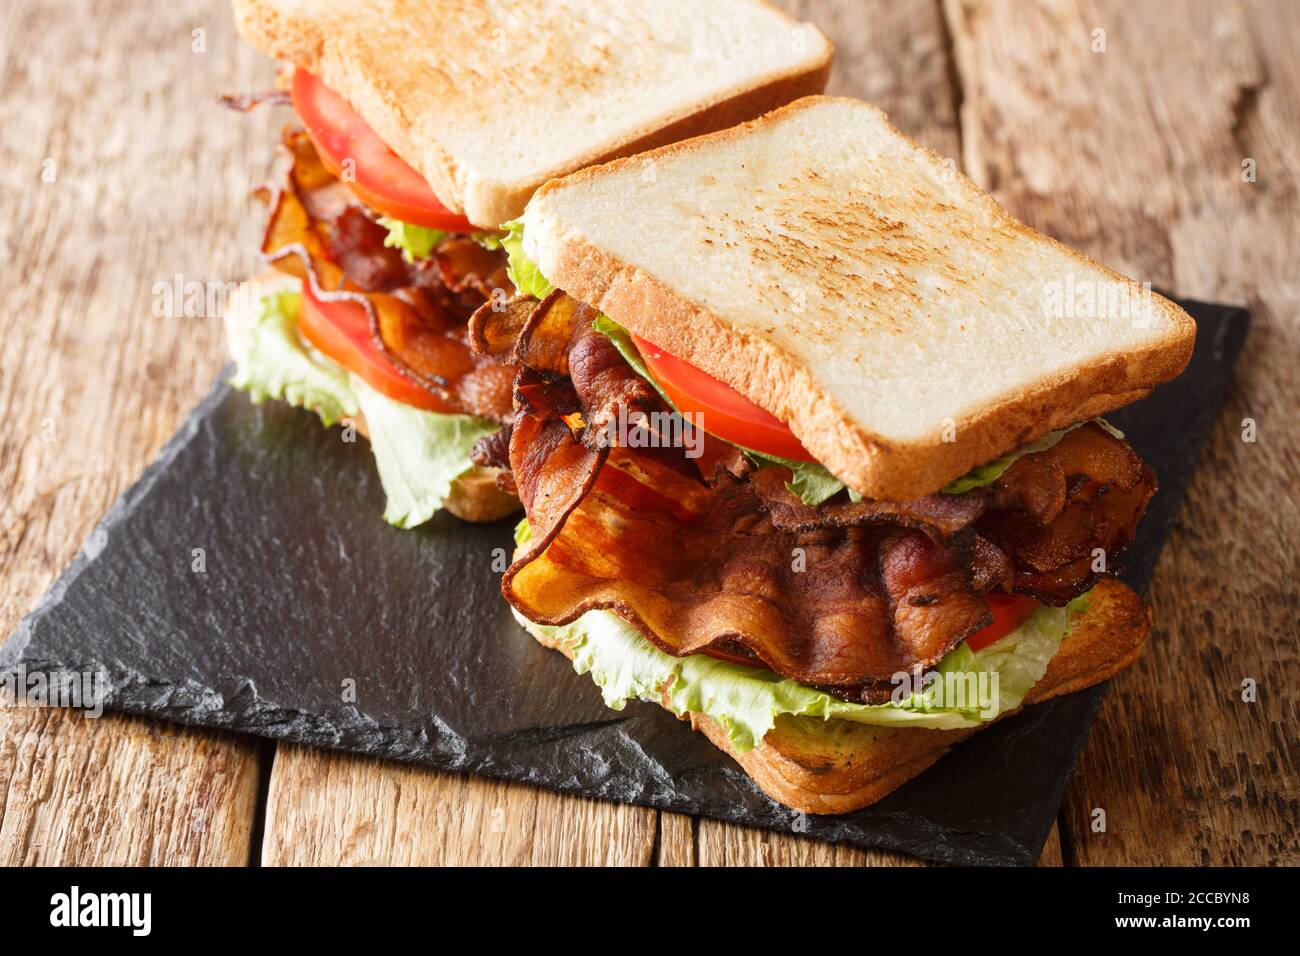 American fast food blt sandwich with bacon, fresh salad and tomatoes close-up on a slate board on the table. horizontal Stock Photo